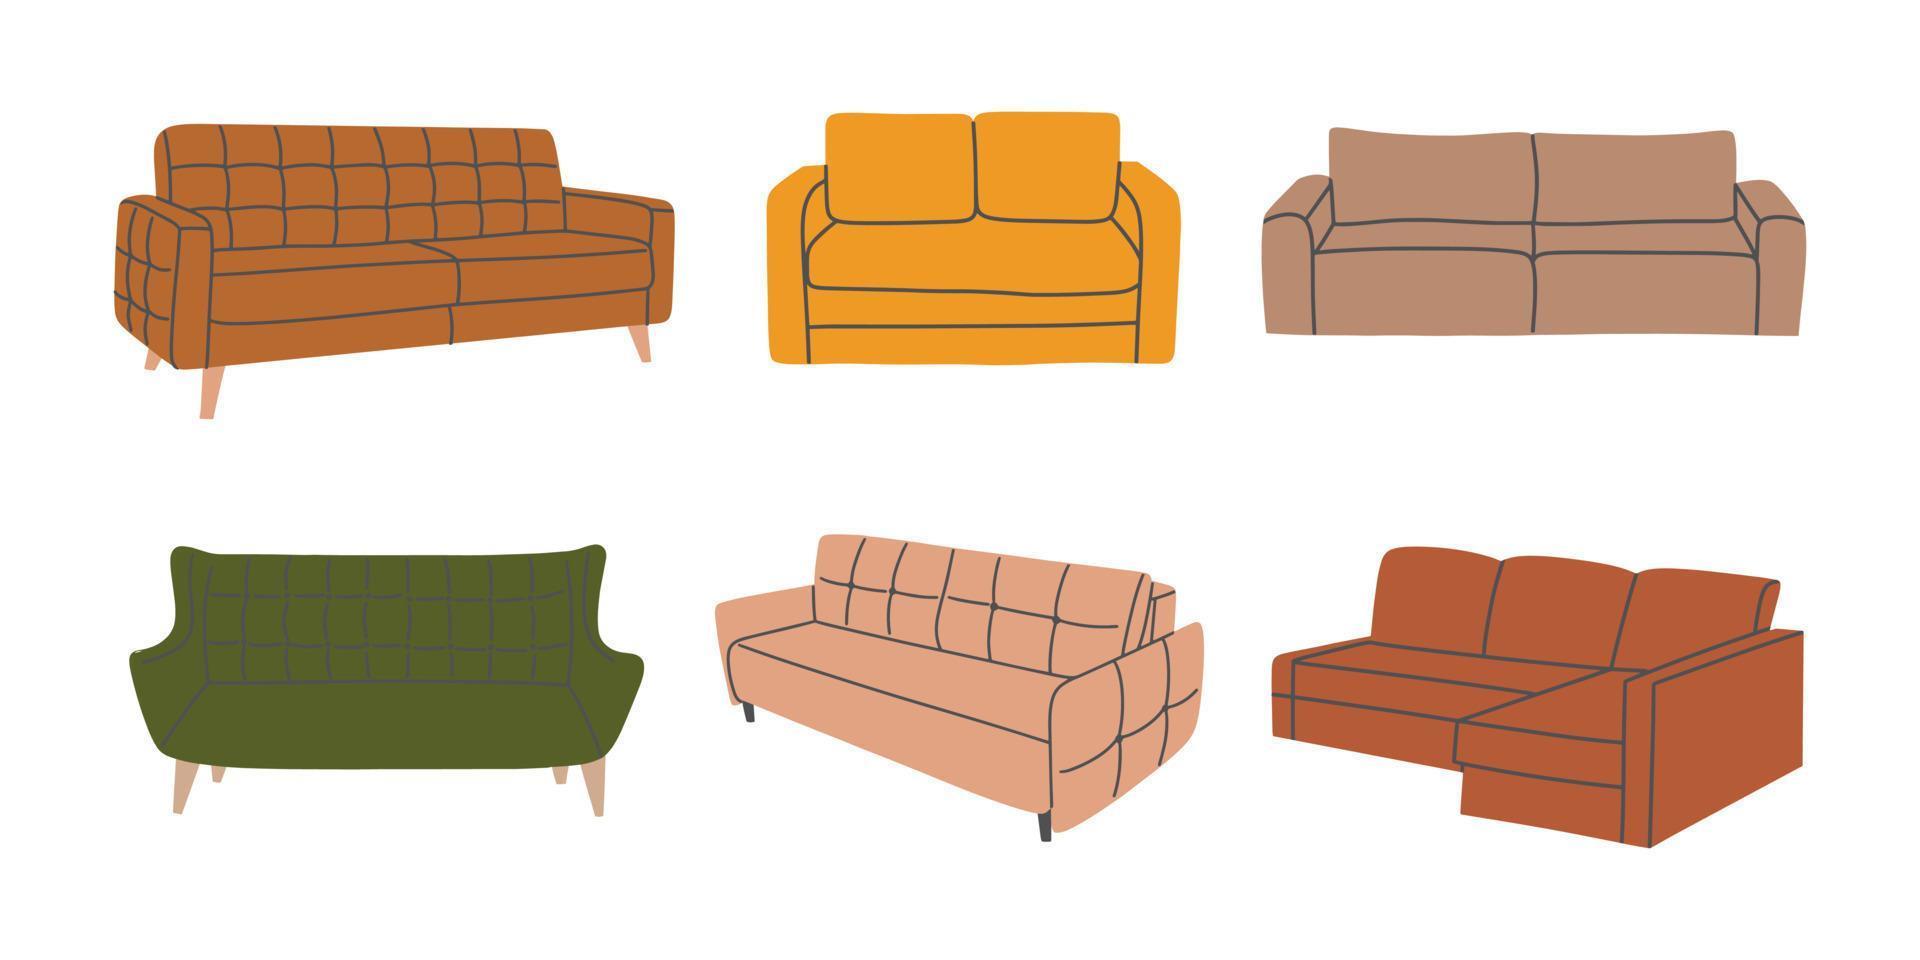 Set of various trendy colorful couches. Soft furniture collection for interior design and decoration. Hand drawn vector illustration isolated on white background